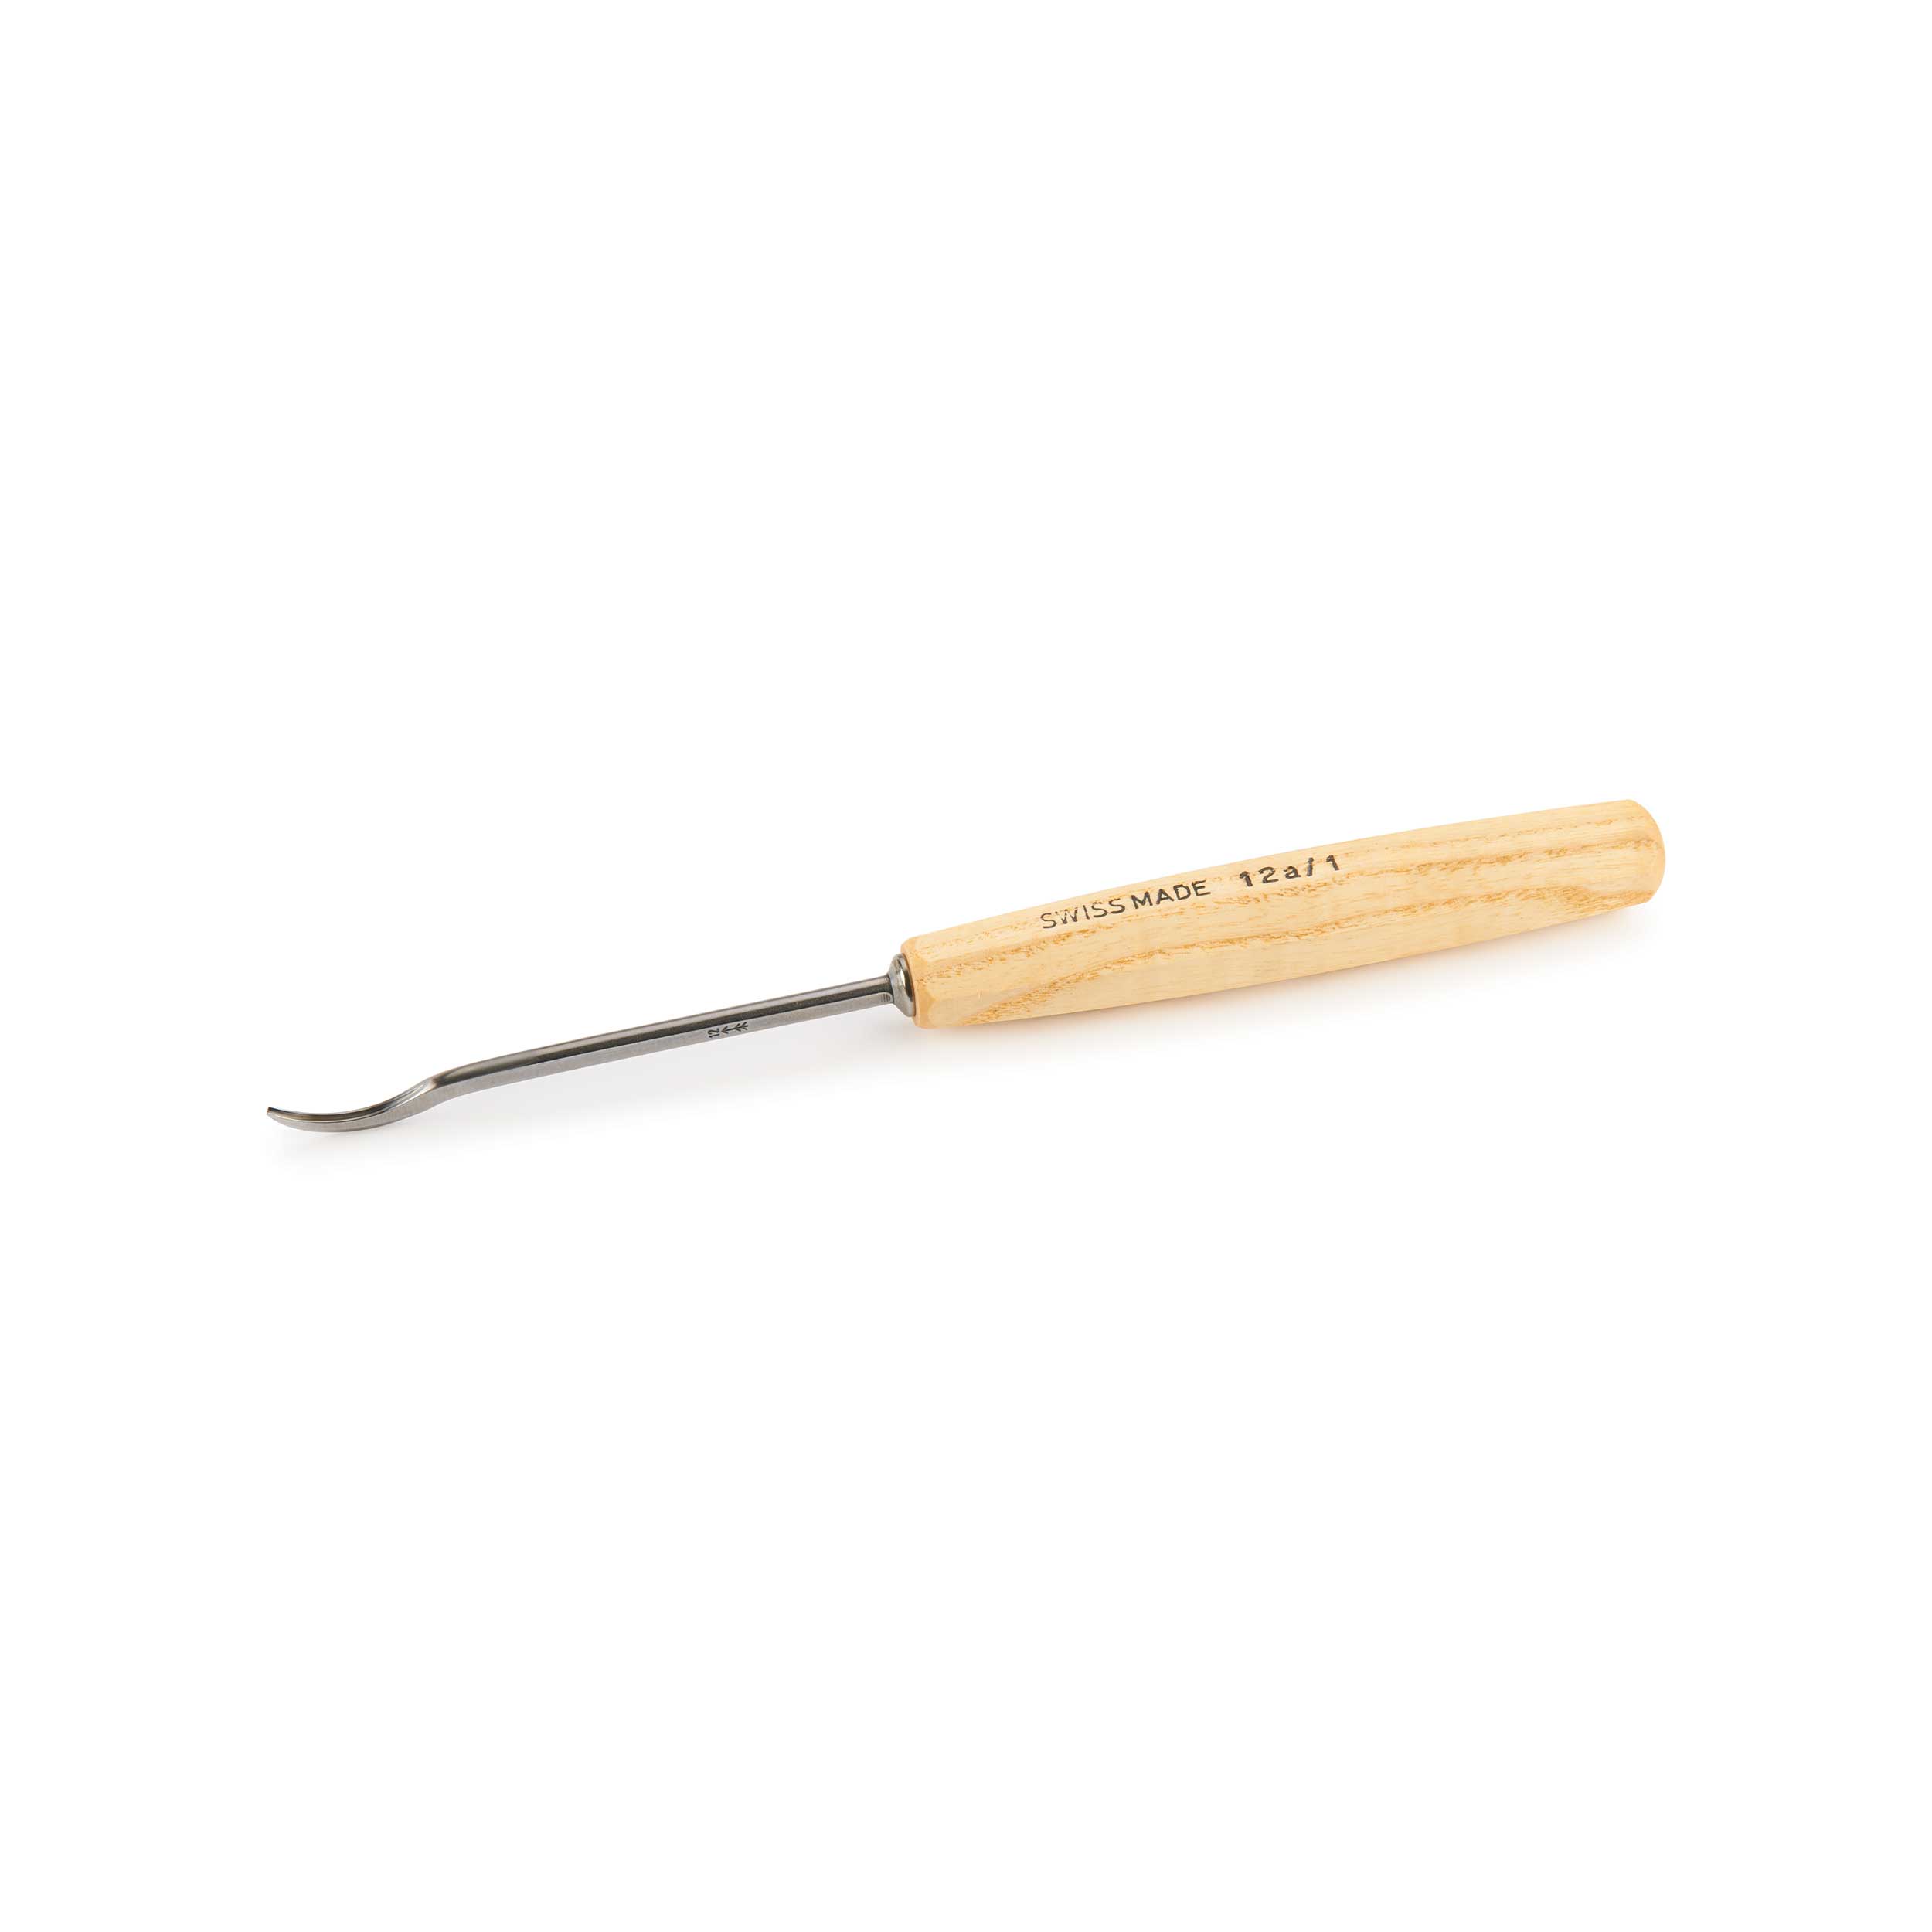 #12 Sweep Bent V-parting Tool, 1 Mm, Full Size